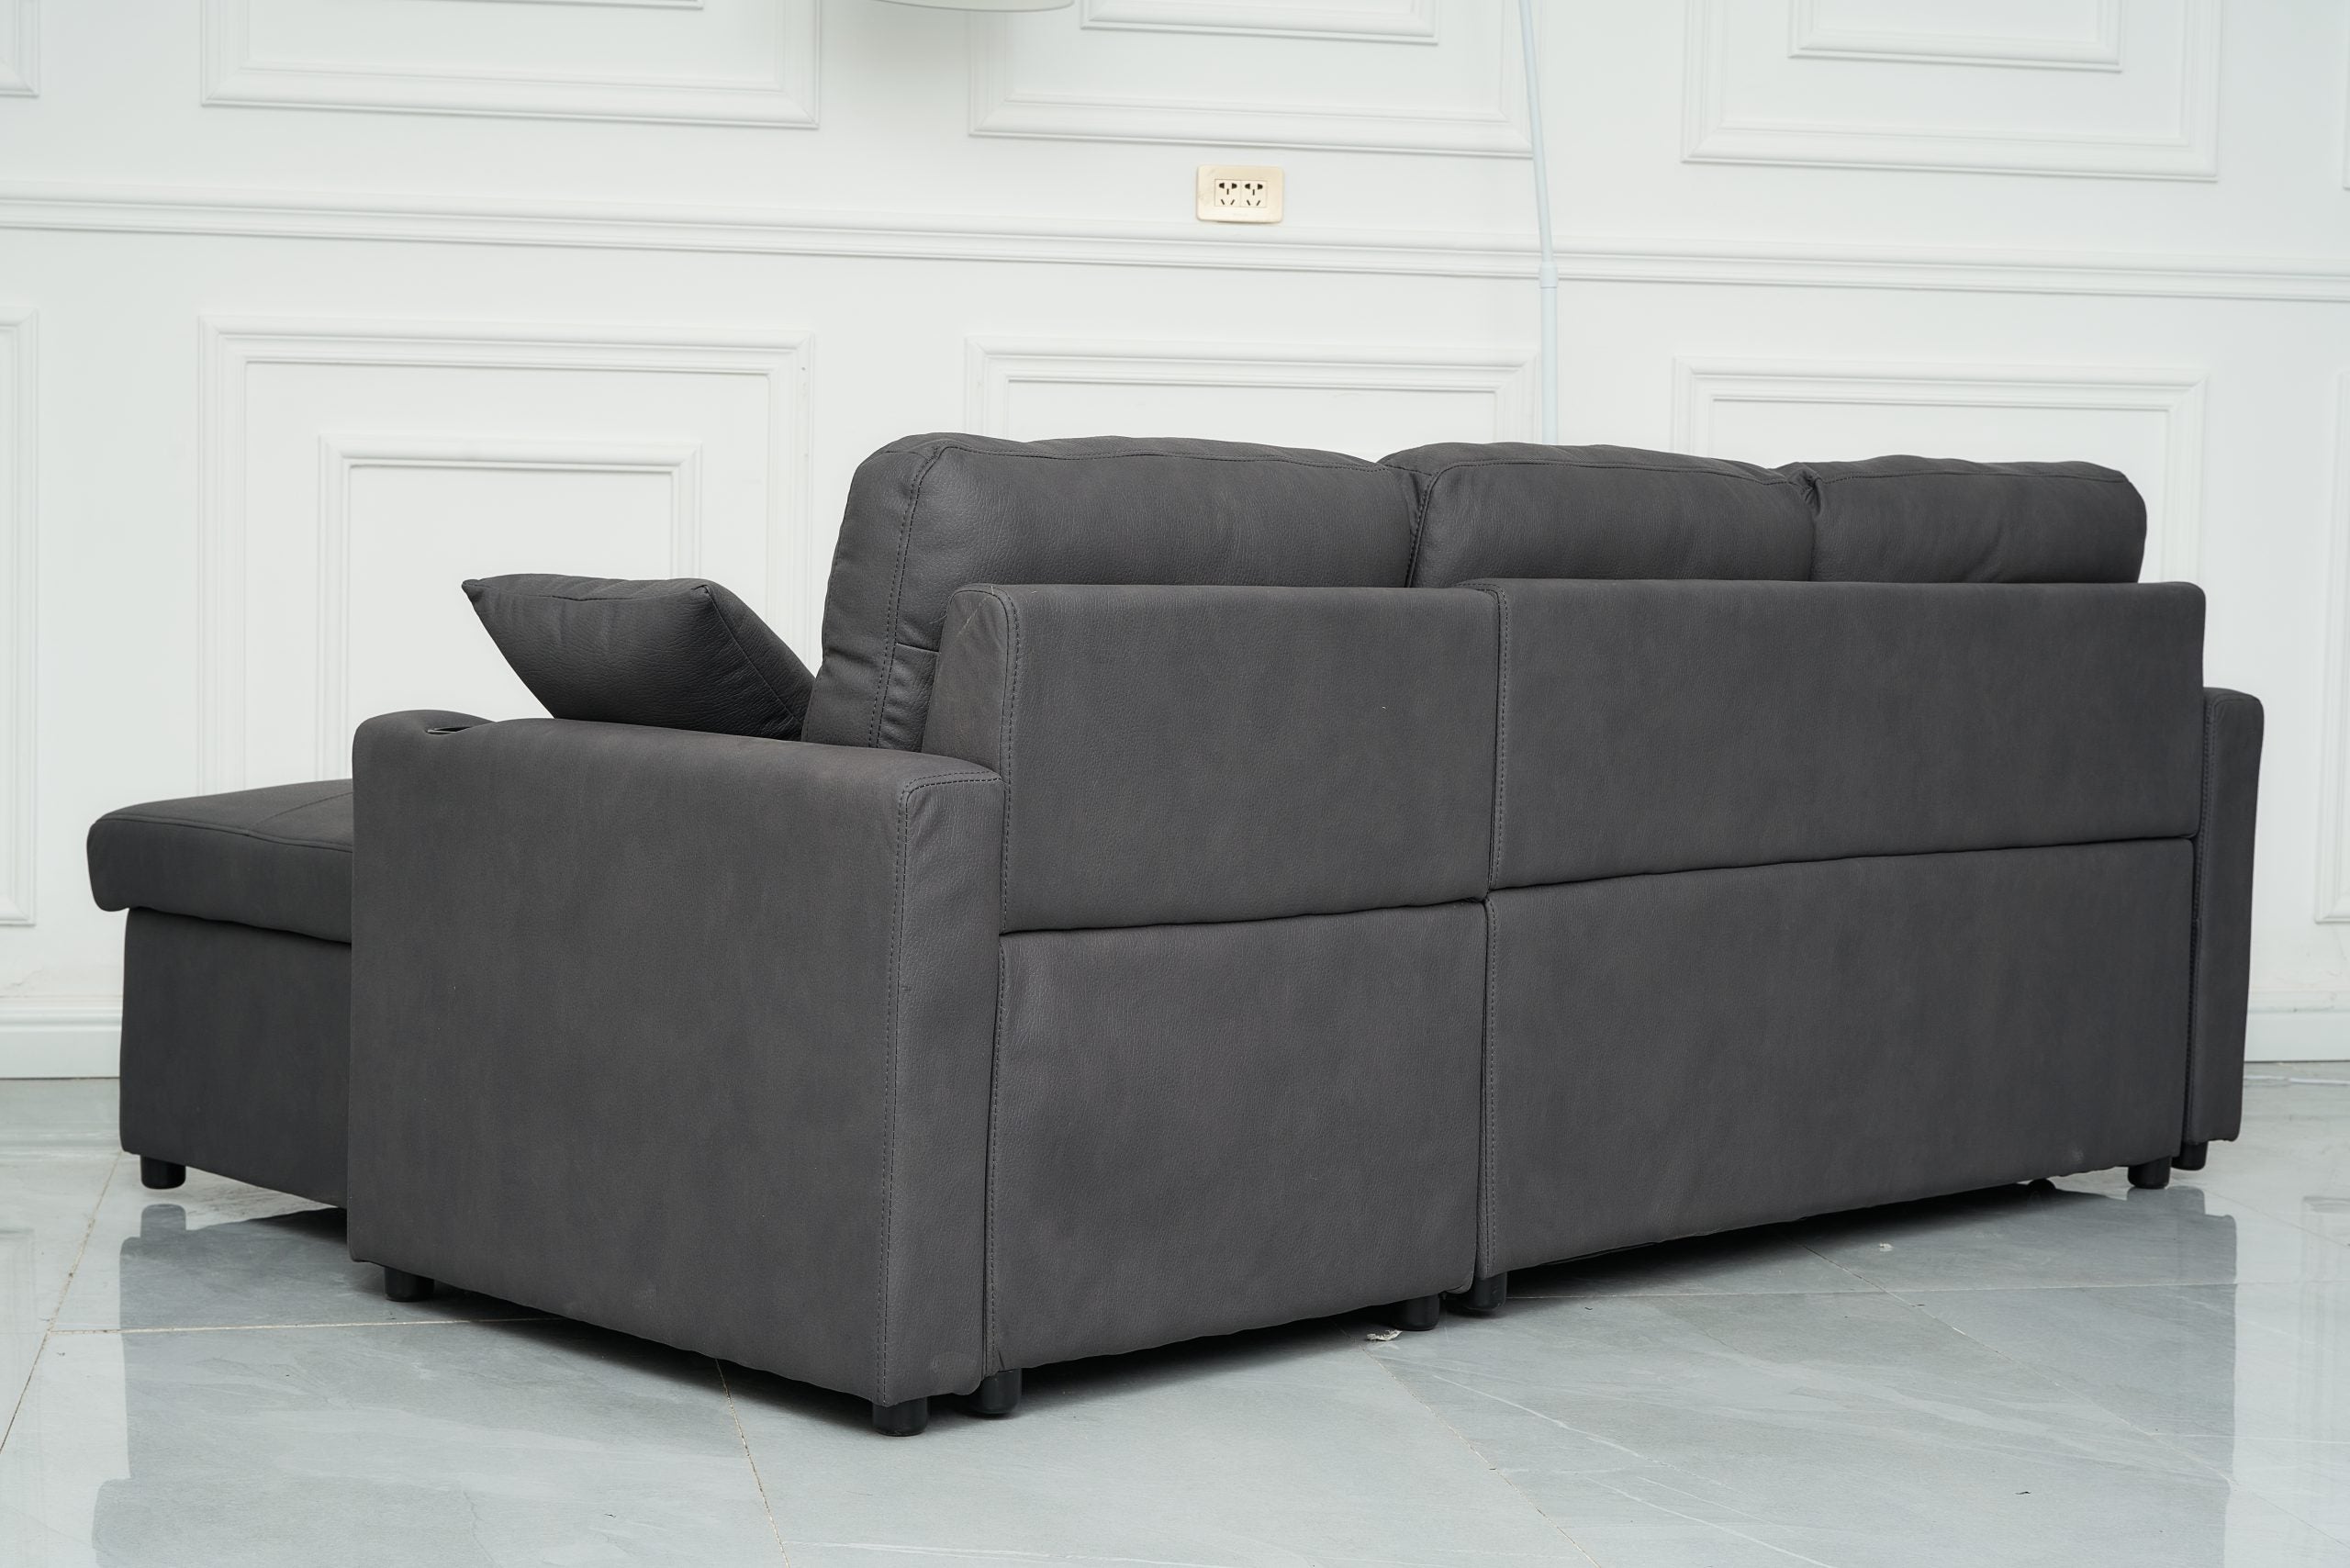 BT Romy Fabric Upholstered 2 Seater Sofa Bed with Storage Chaise